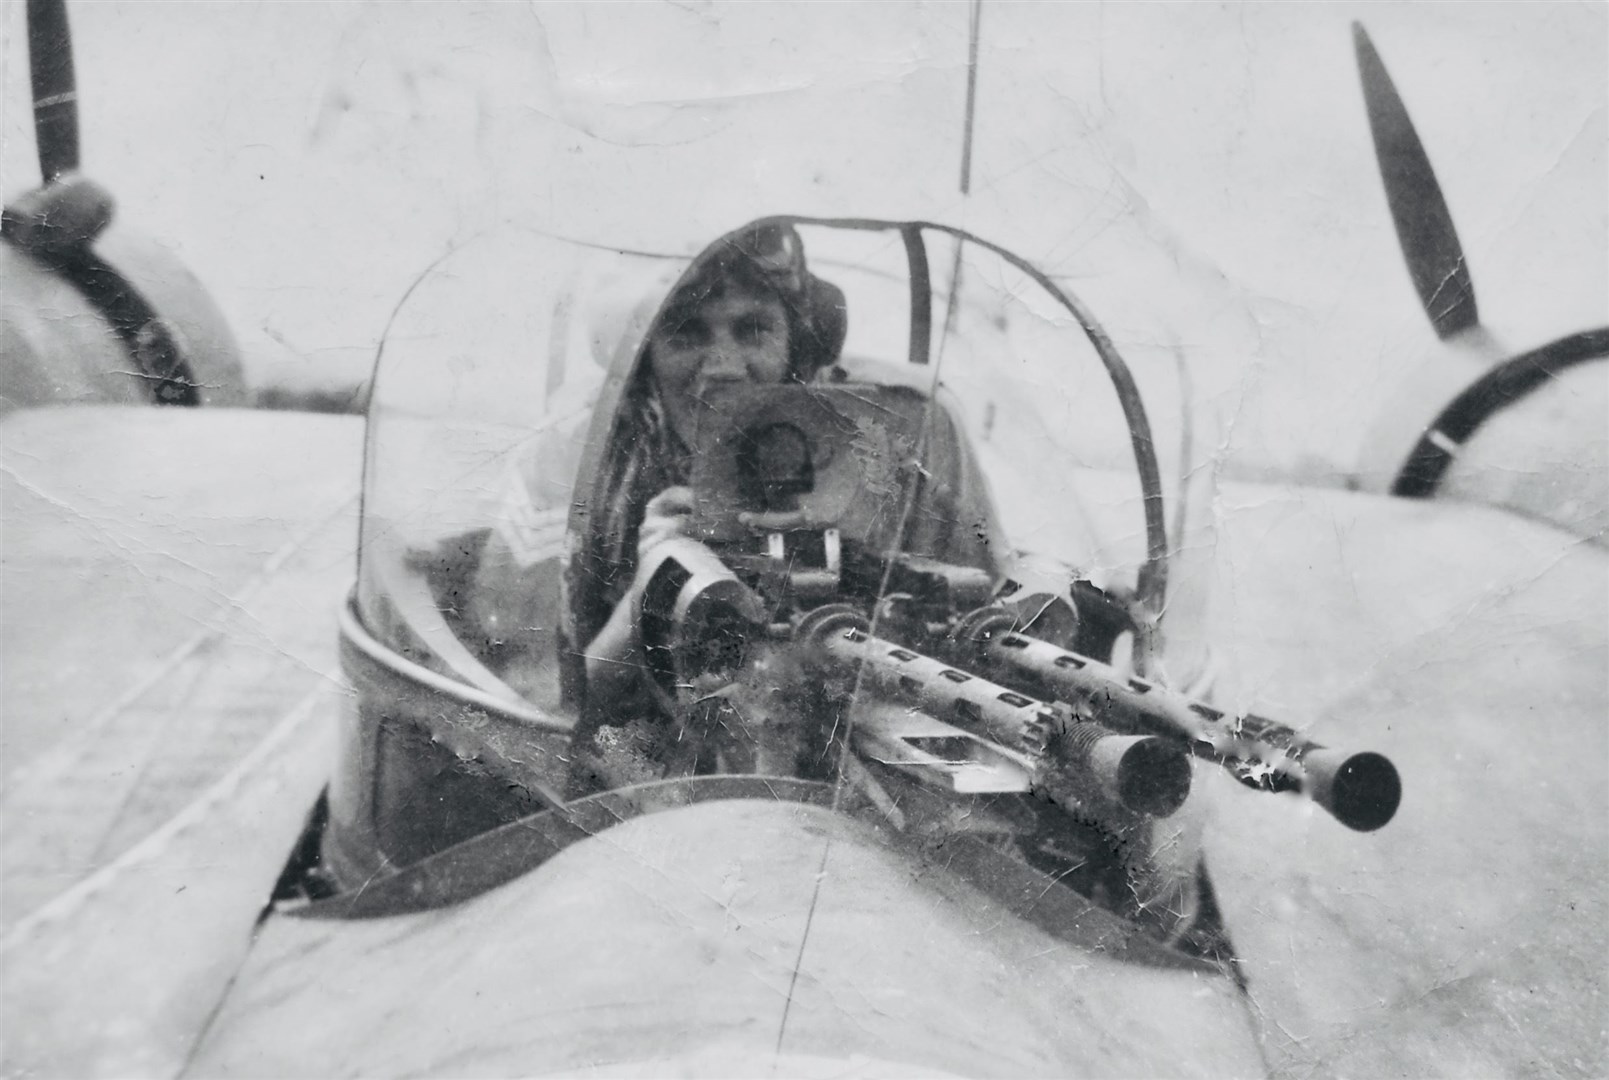 Flt Sgt Ron Chapman in a Bisley gun turret, which added weight to the aircraft without additional engine power. The location is likely Djinna Island off Saudi Arabia, April, 1943. The team repairing and rescuing the aircraft flew out of Bahrein.